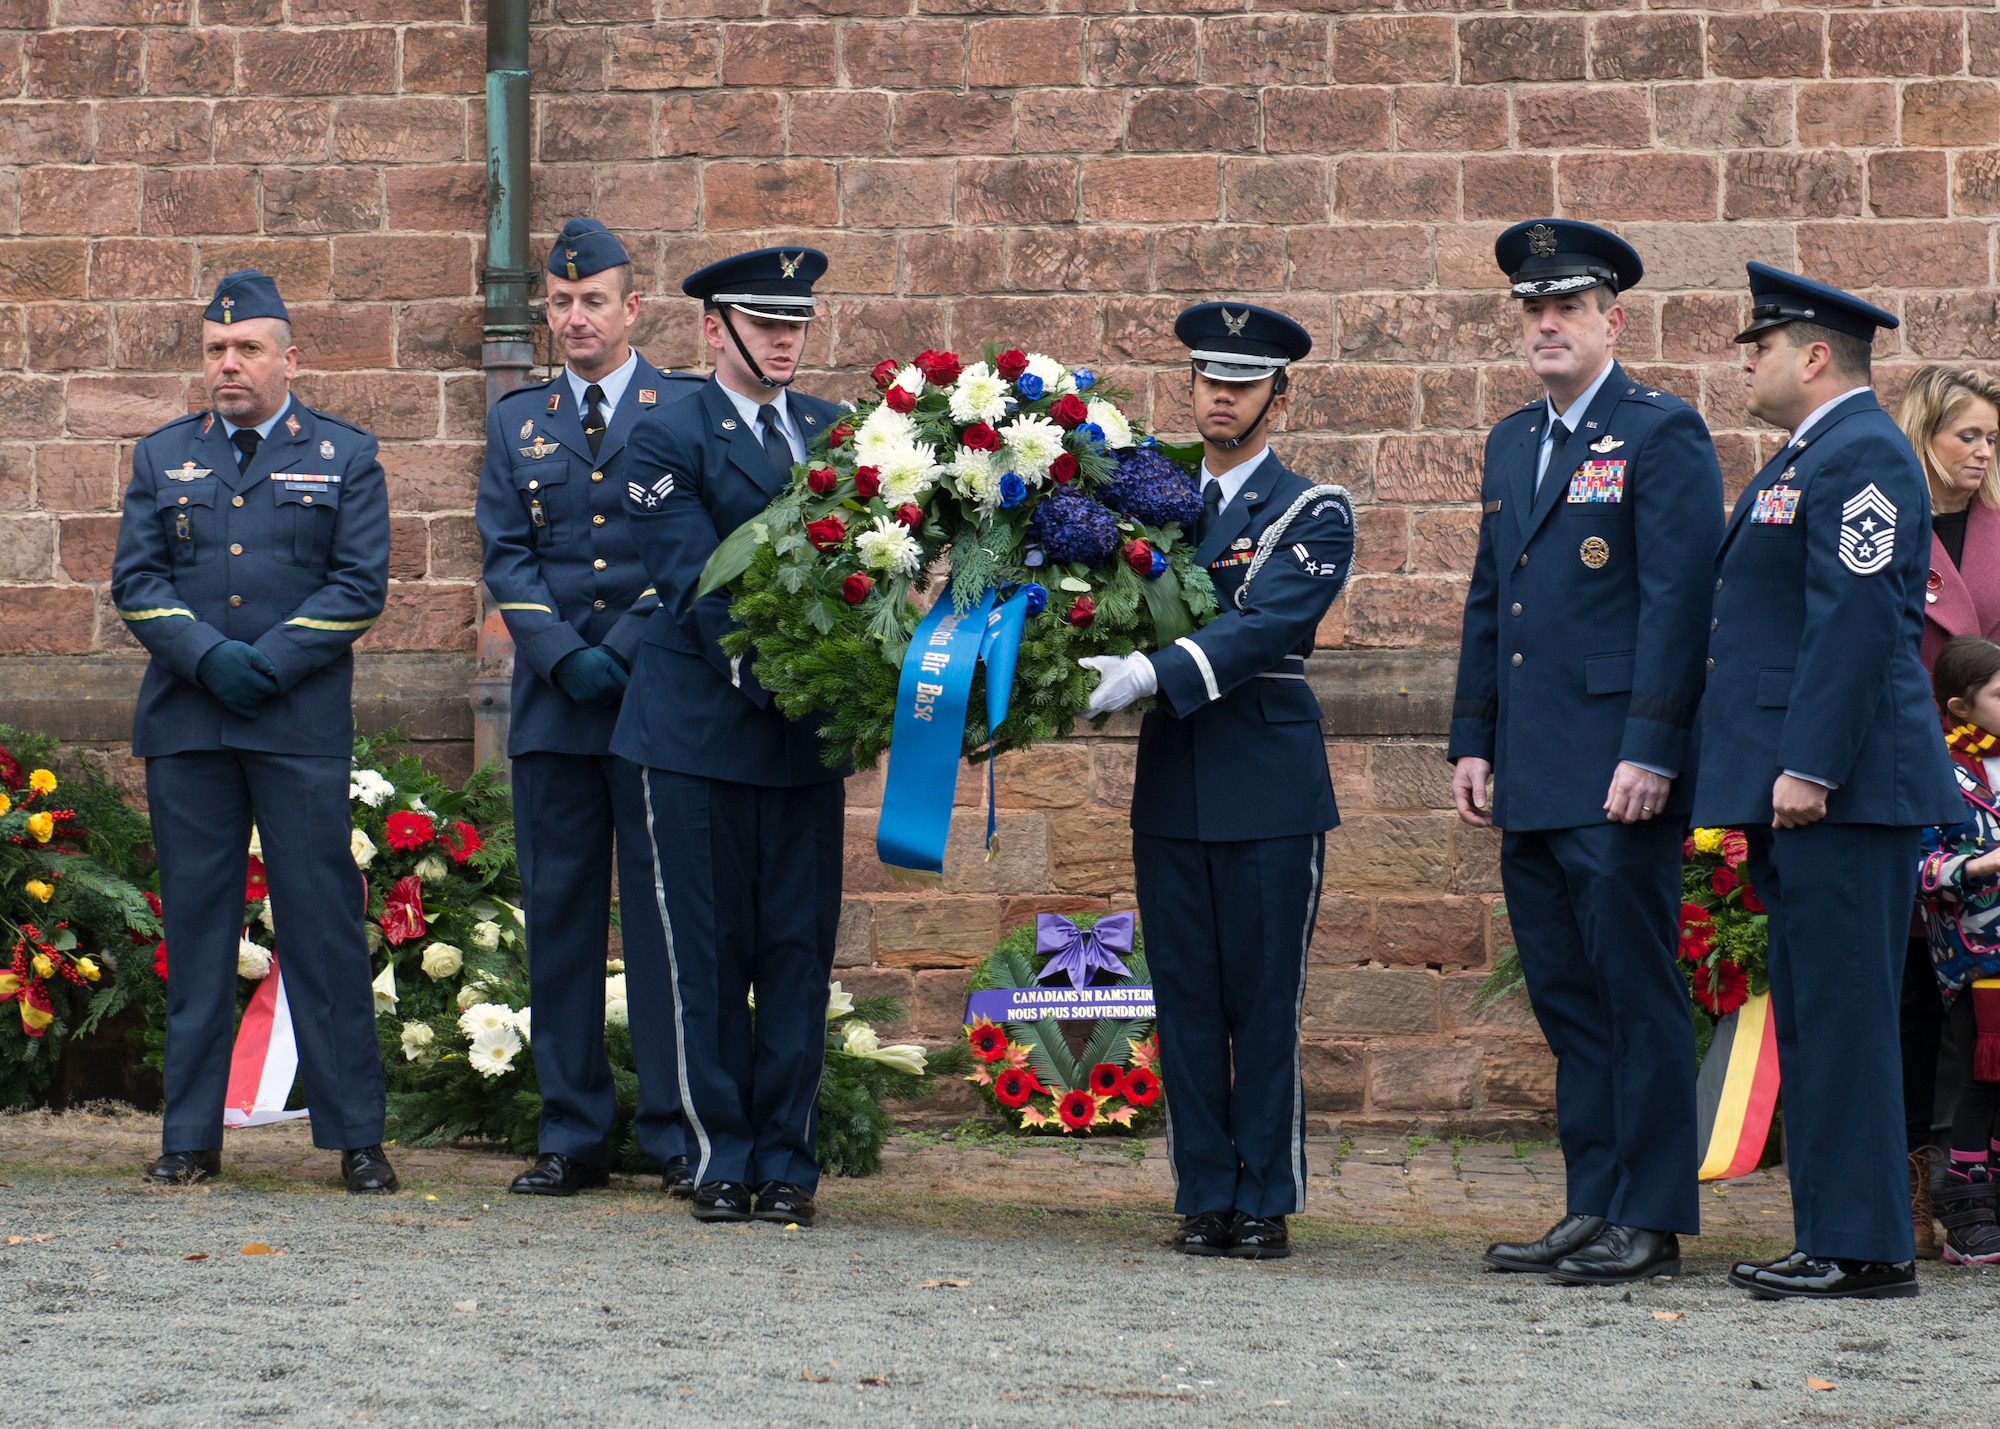 U.S. Air Force Brig. Gen. Mark R. August, 86th Airlift Wing commander, and U.S. Air Force Chief Master Sgt. Ernesto J. Rendon, 86th AW command chief, look on as members of the Ramstein Air Base Honor Guard prepare to lay a wreath during the Ramstein-Miesenbach’s National Day of Mourning Ceremony, Nov. 17, 2019.